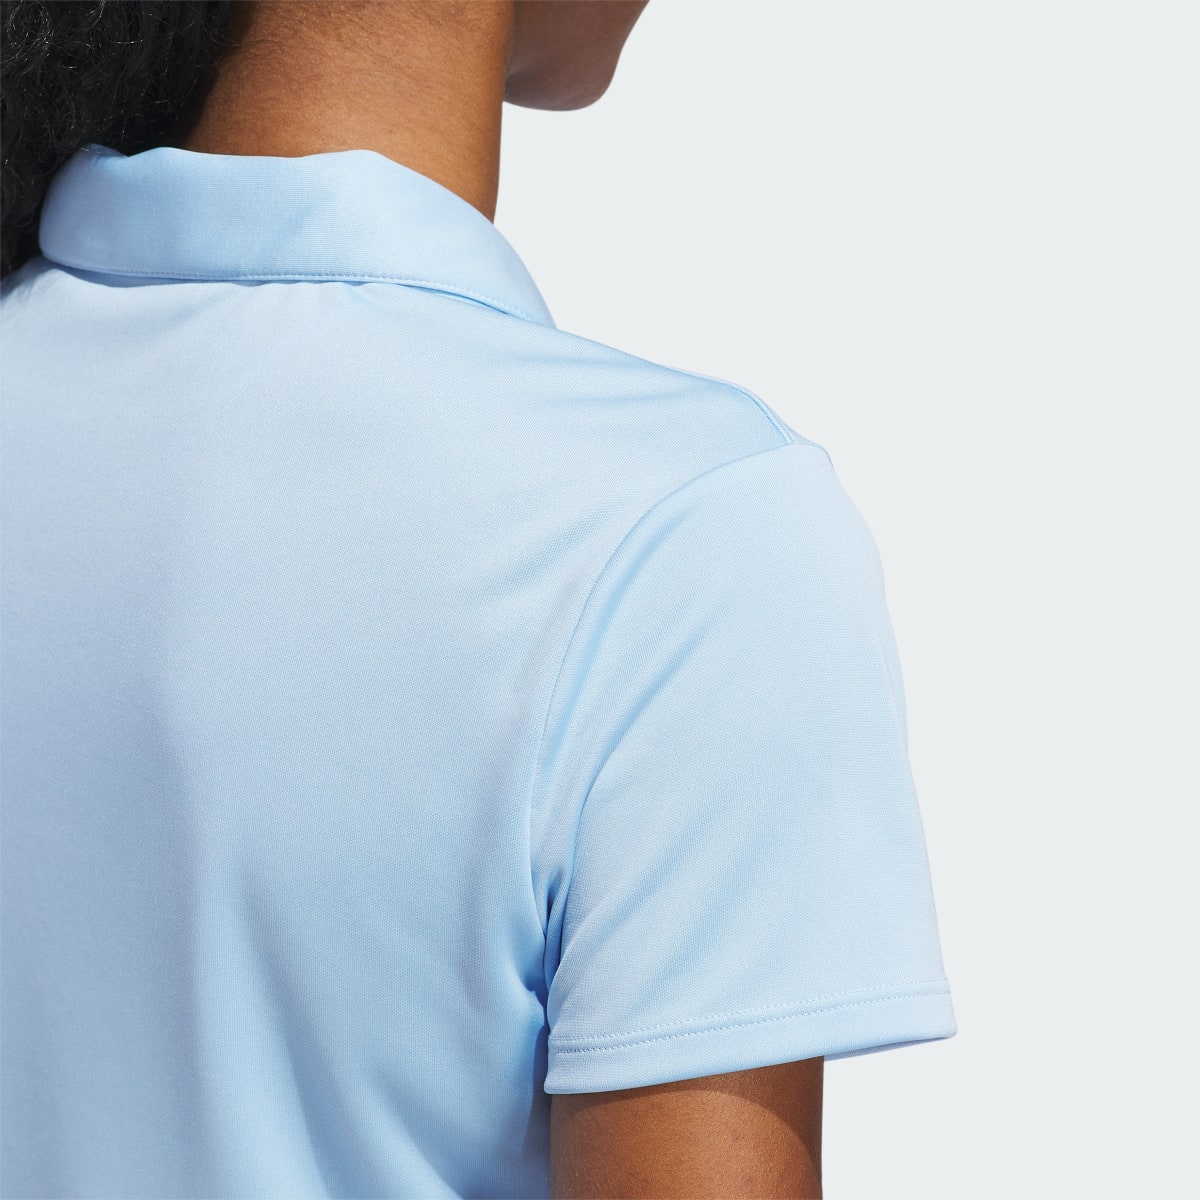 Adidas Polo Solid Performance – Mulher. 5